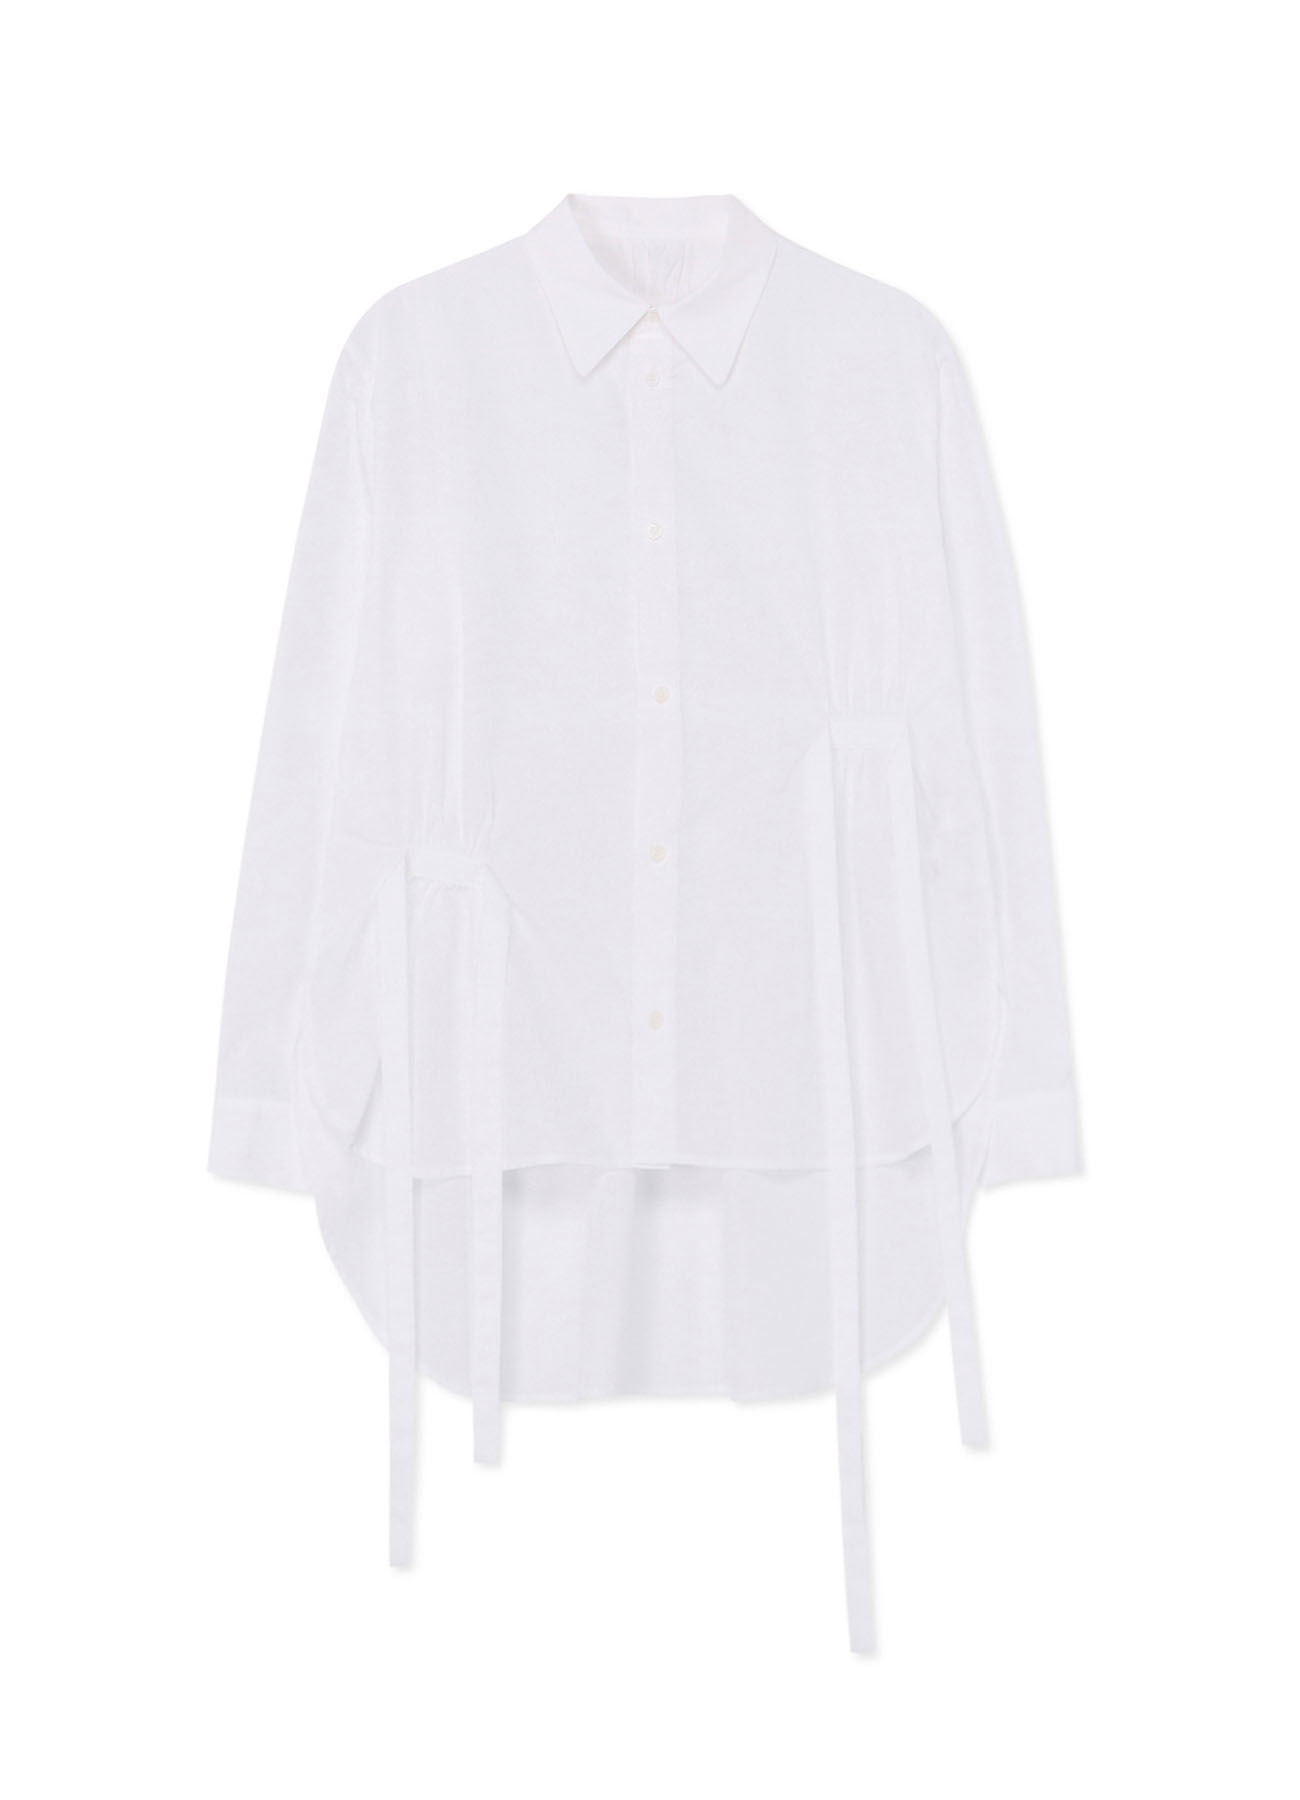 100/2 COTTON BROADCLOTH SHIRT WITH FRONT/BACK GATHERED DETAILS